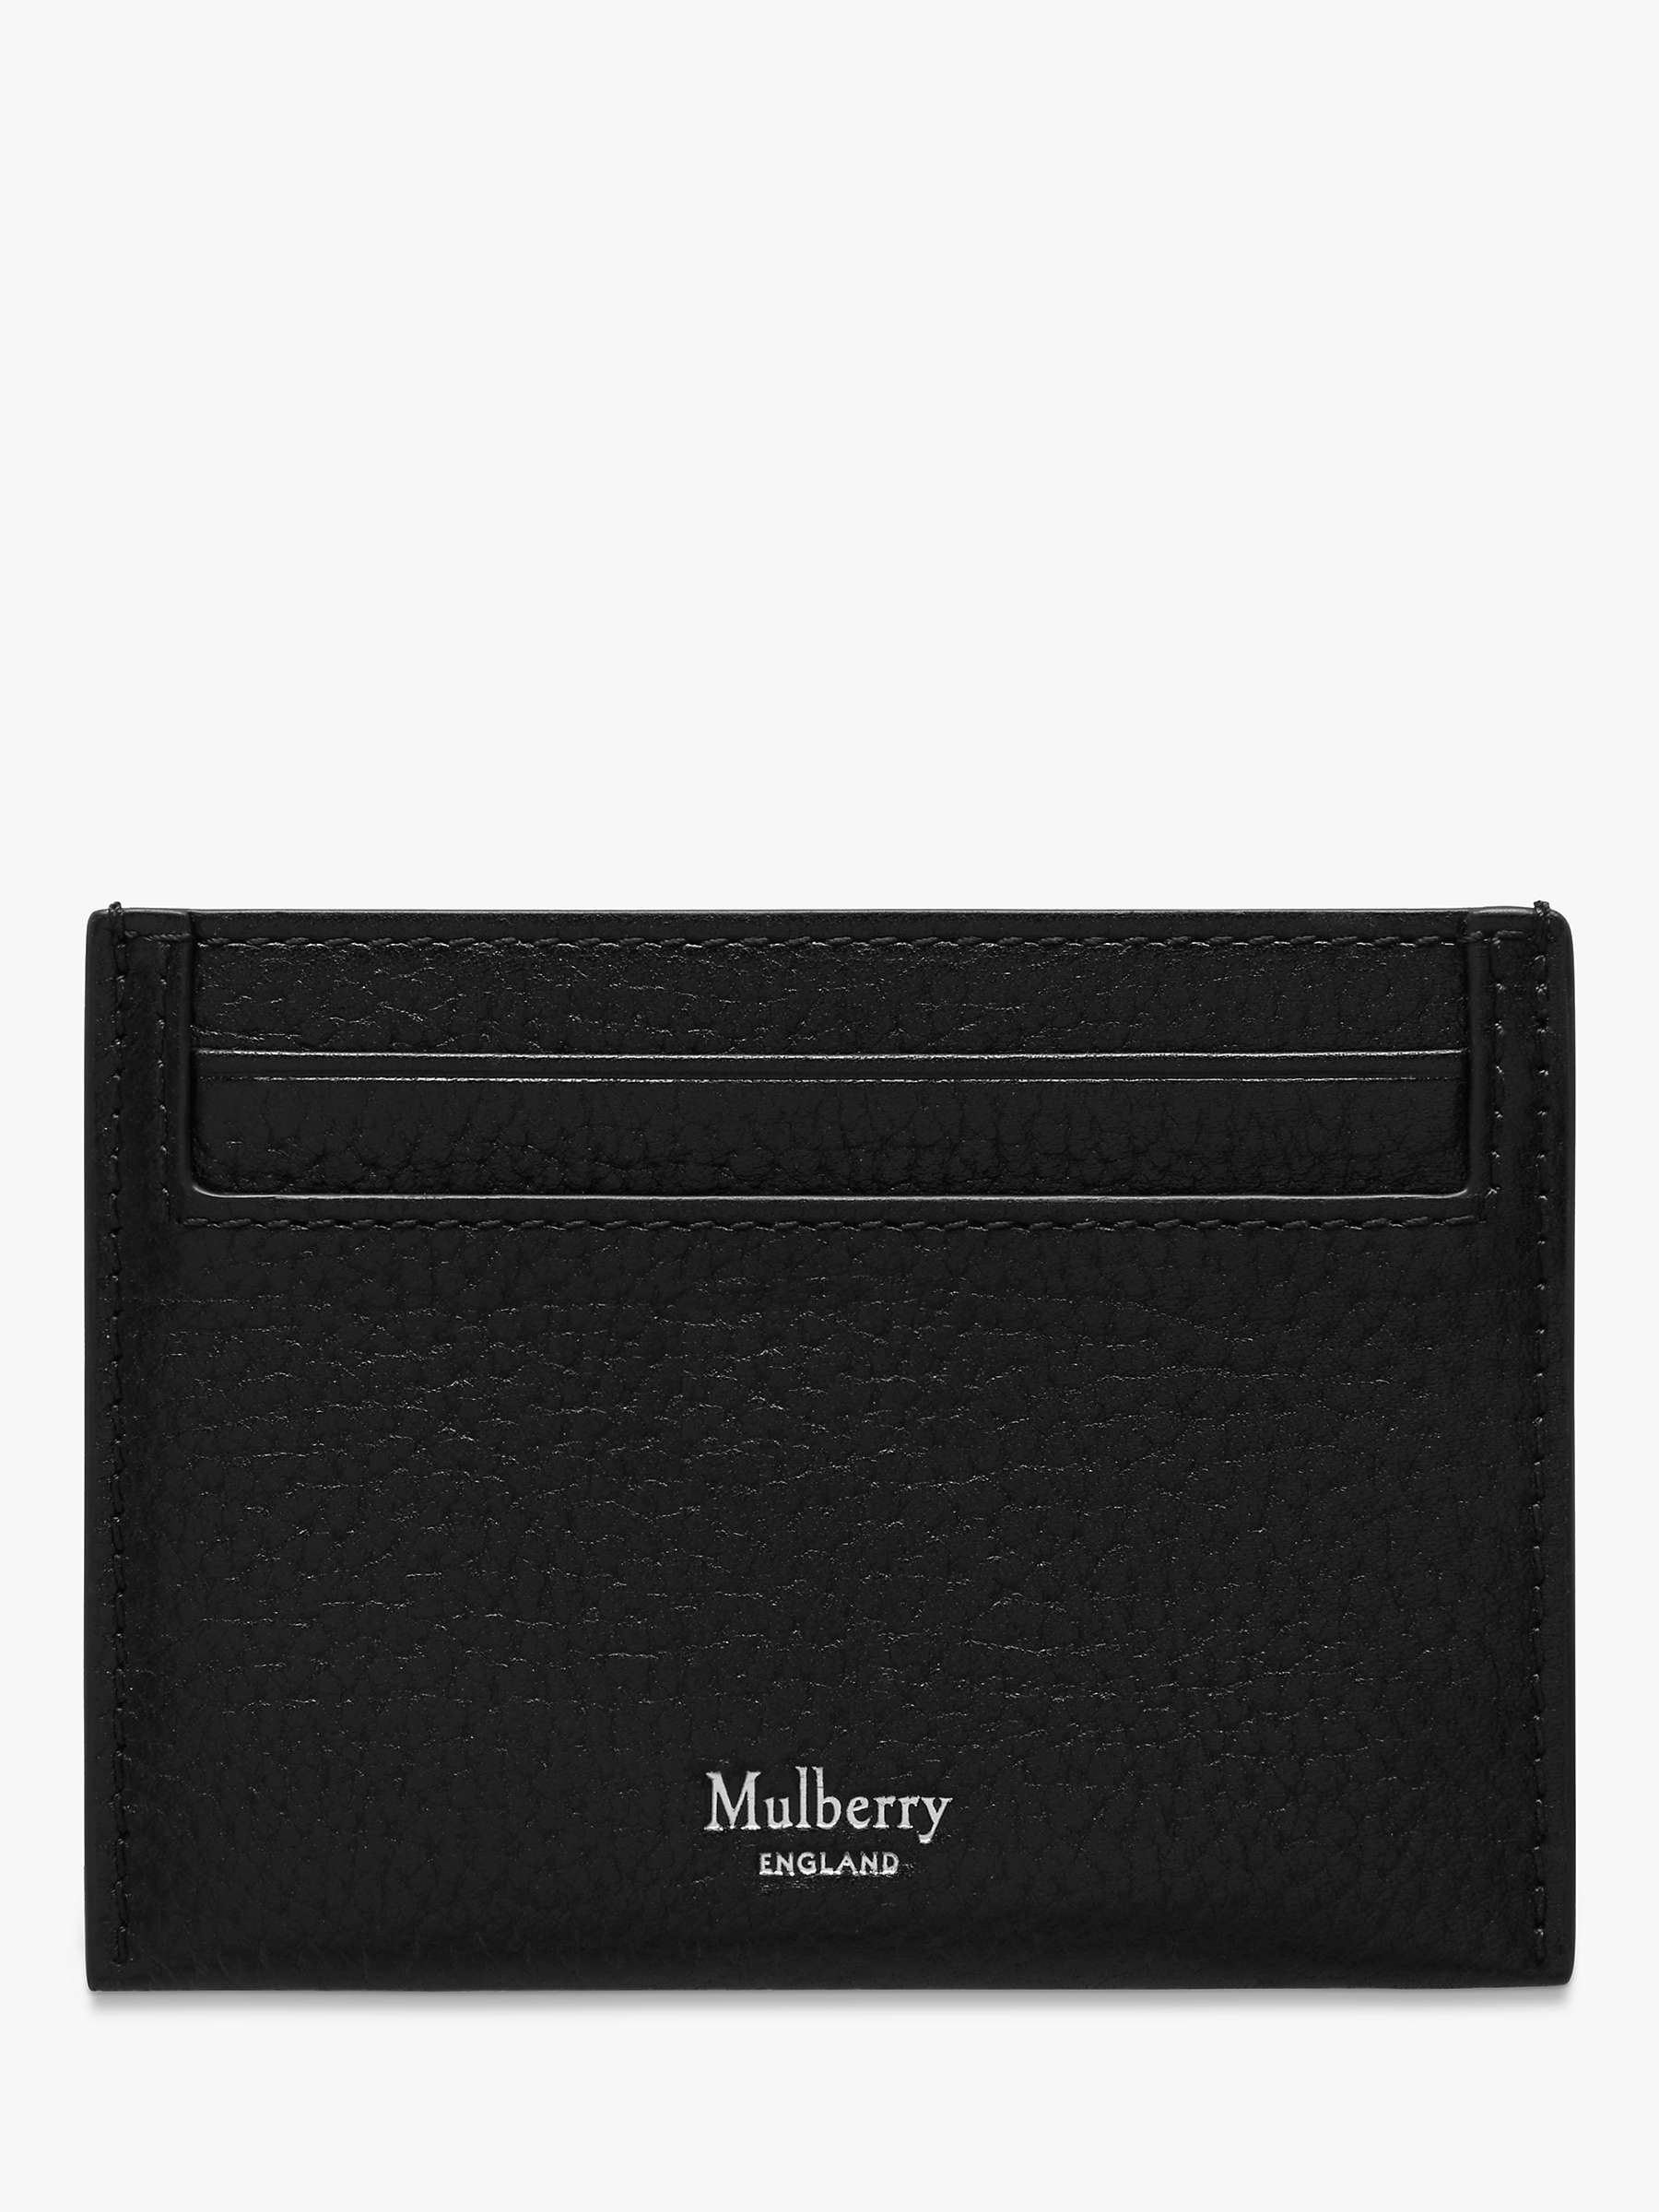 Buy Mulberry Grain Veg Tanned Leather Credit Card Slip Online at johnlewis.com